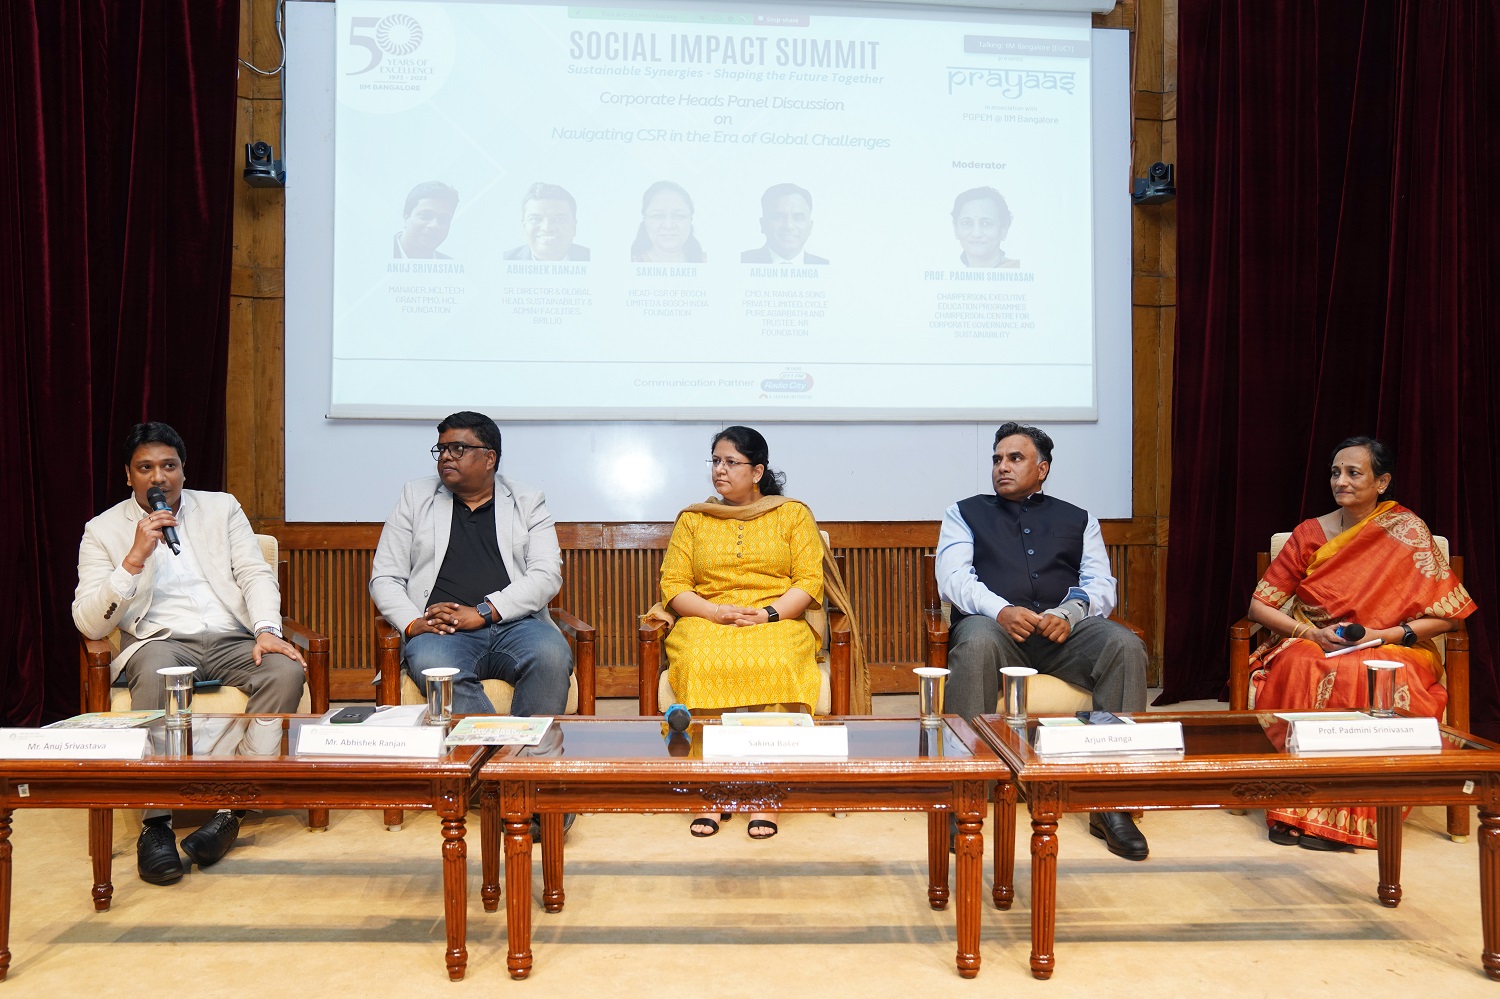 Prof. Padmini Srinivasan, Chairperson of the Centre for Corporate Governance & Sustainability and Executive Education Programmes and faculty of the Finance & Accounting area, IIMB, moderates the panel discussion on ‘Sustainable Synergies: Navigating CSR in the Era of Global Challenges’. (L-R): Anuj Srivastava, Manager, HCLTech Grant, HCL Foundation; Abhishek Ranjan, Senior Director & Global Head, Sustainability & Admin/Facilities, Brillio; Sakina Baker, Head, CSR, Bosch Limited and Bosch India Foundation; Arjun M Ranga, CMD, N. Ranga Rao & Sons Private Limited, Cycle Pure Agarbathi and Trustee, NR Foundation, and Prof. Padmini Srinivasan.